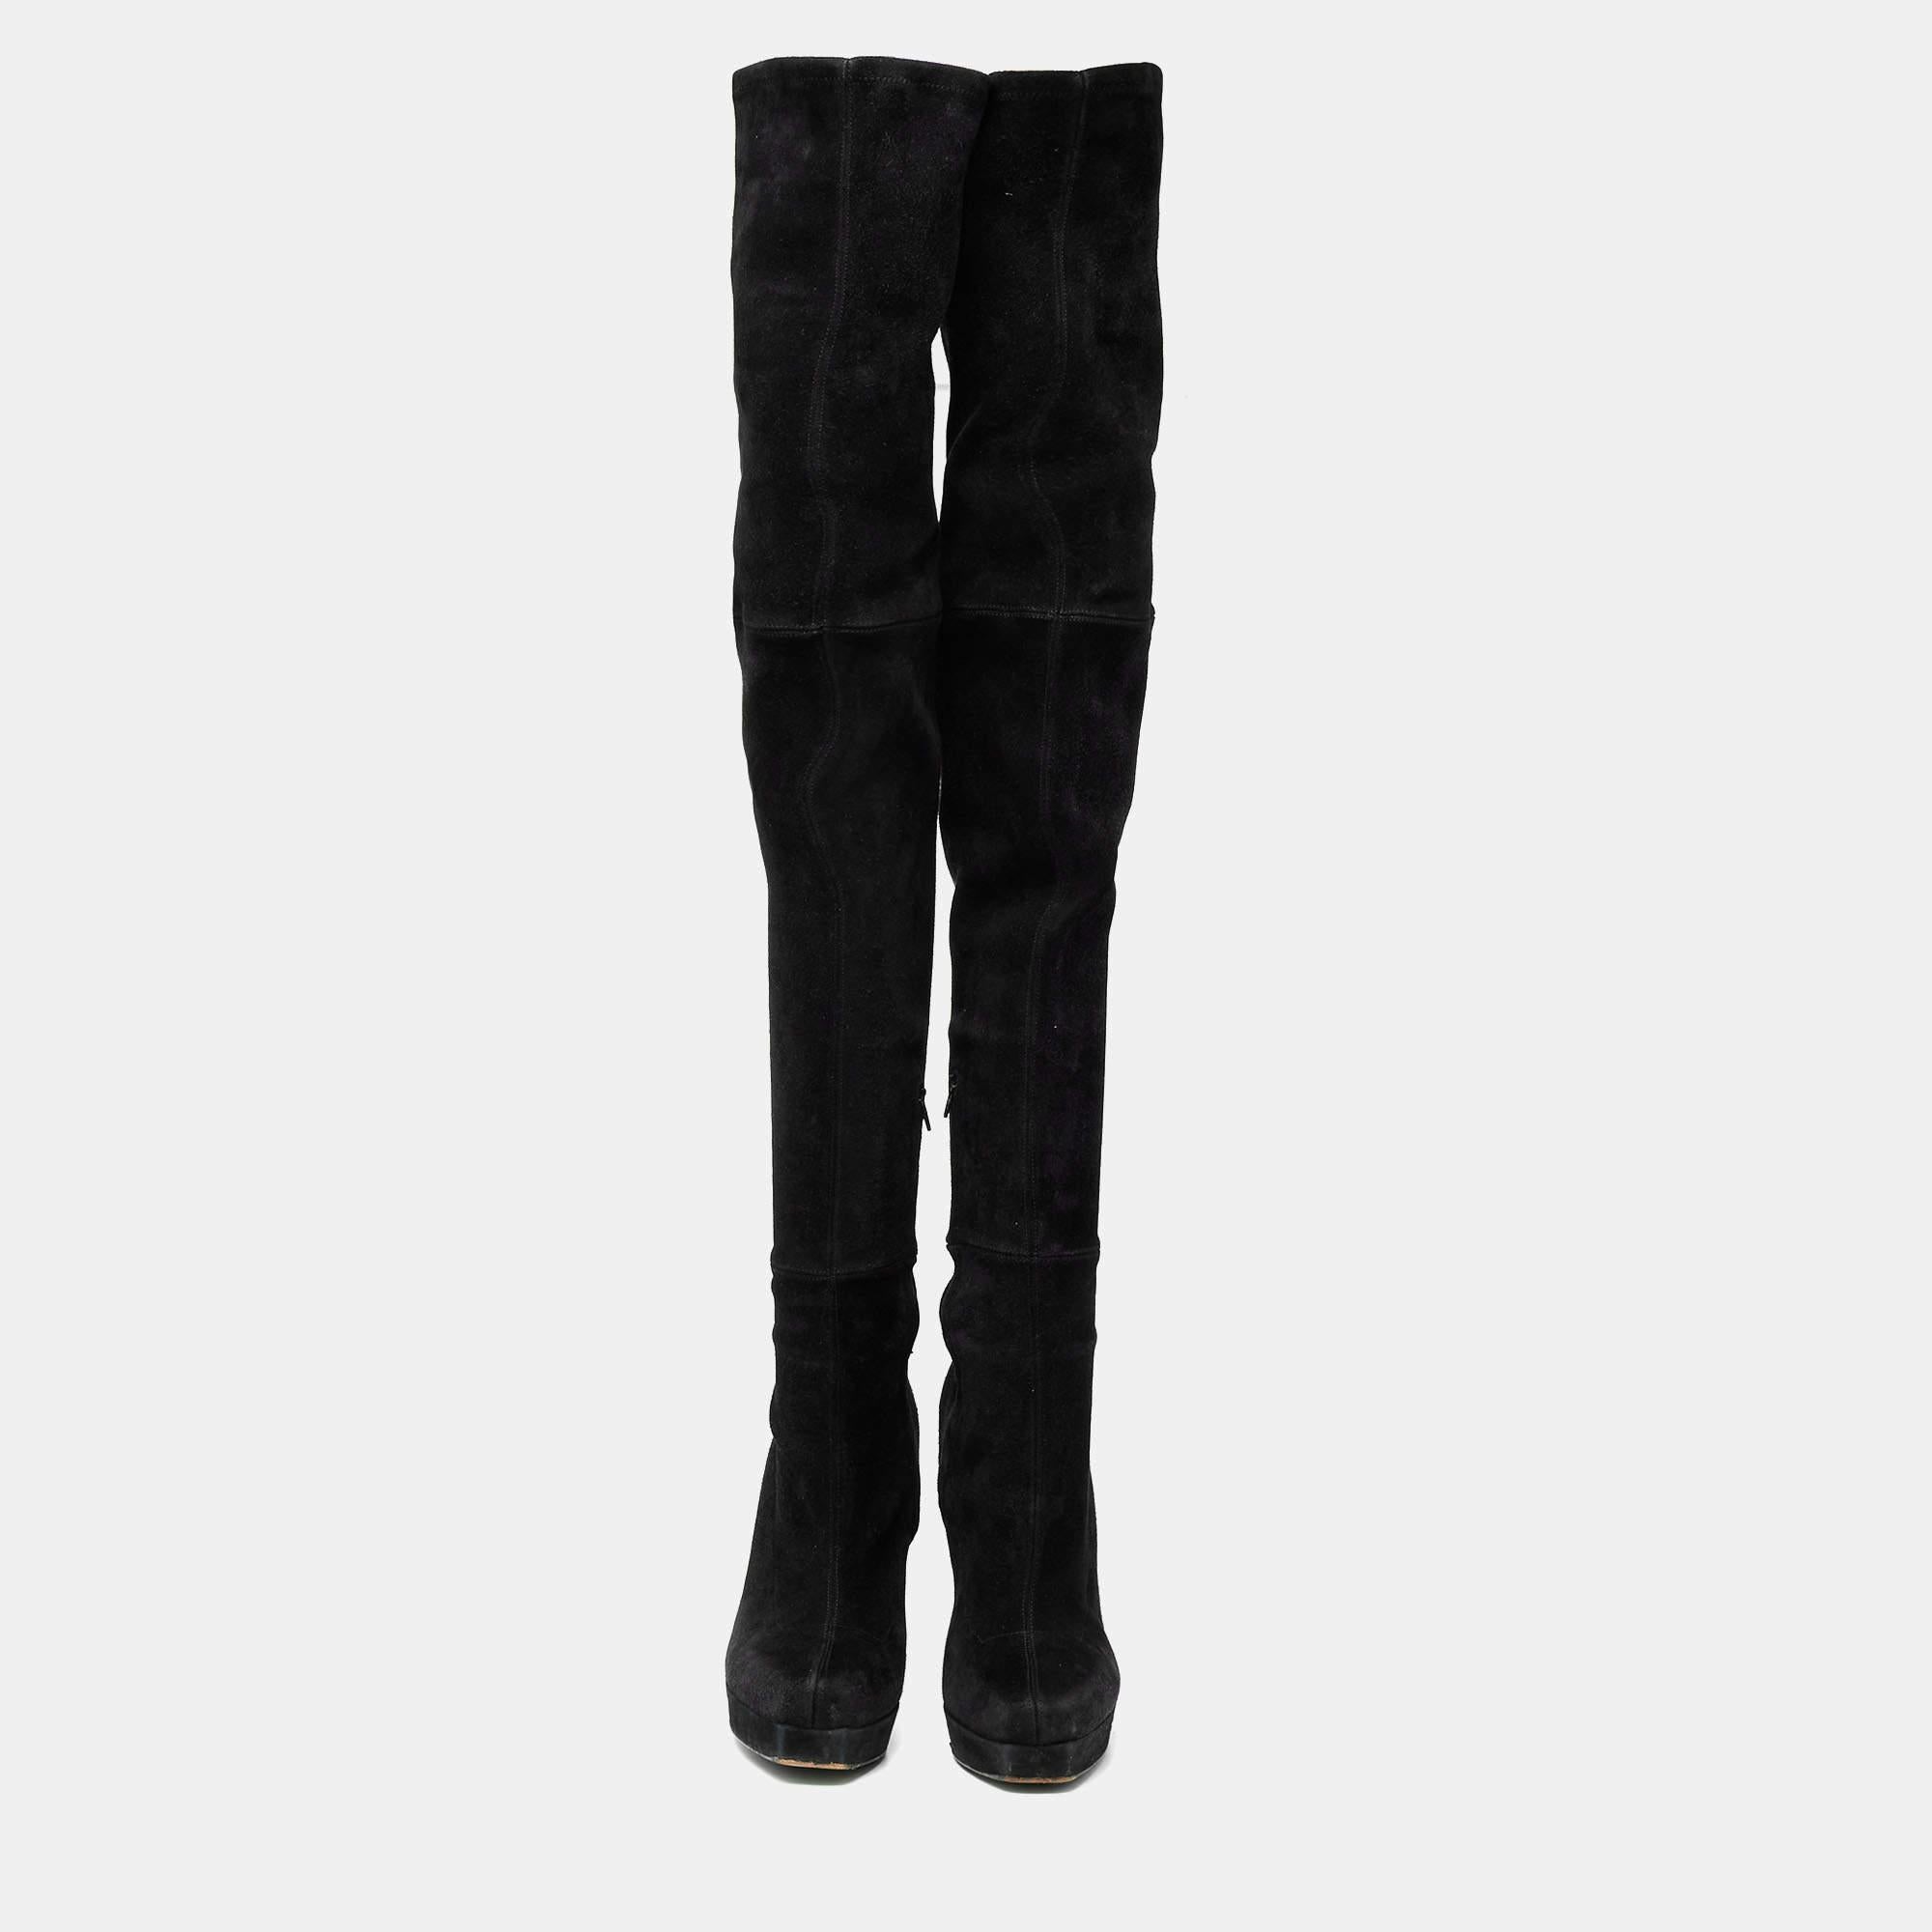 If you're looking to add a pair of over-the-knee boots to your collection, it should be this one from Gucci! The black boots are crafted from suede into a chic silhouette. They are elevated on platforms and 13.5 cm heels.

